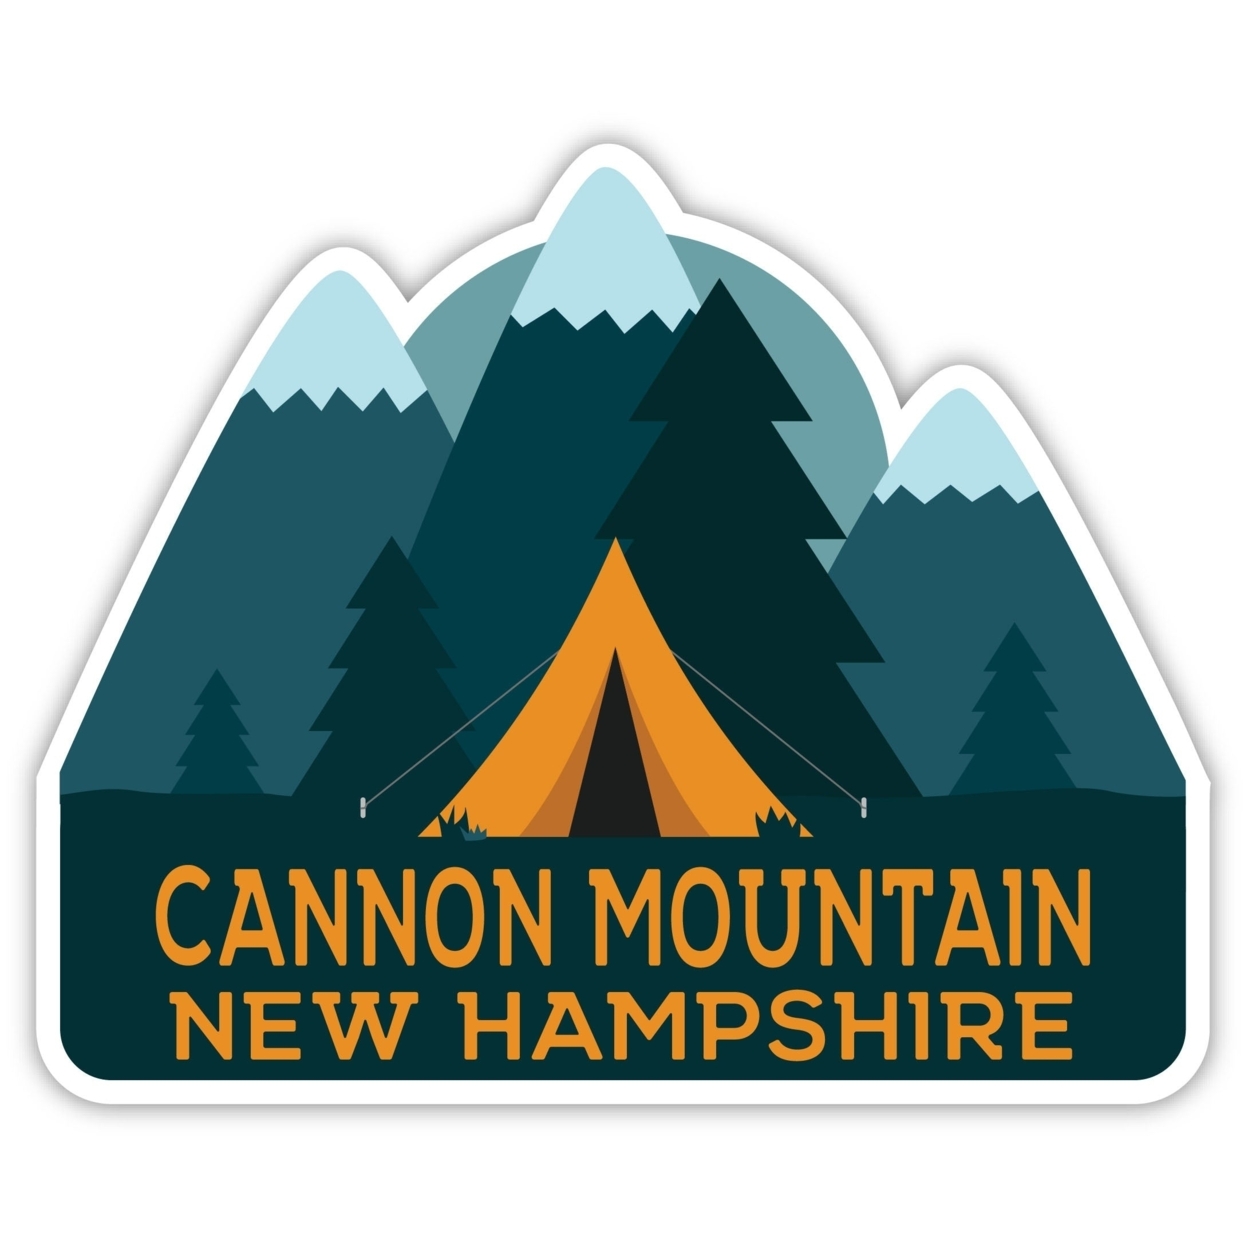 Cannon Mountain New Hampshire Souvenir Decorative Stickers (Choose Theme And Size) - 4-Pack, 2-Inch, Tent